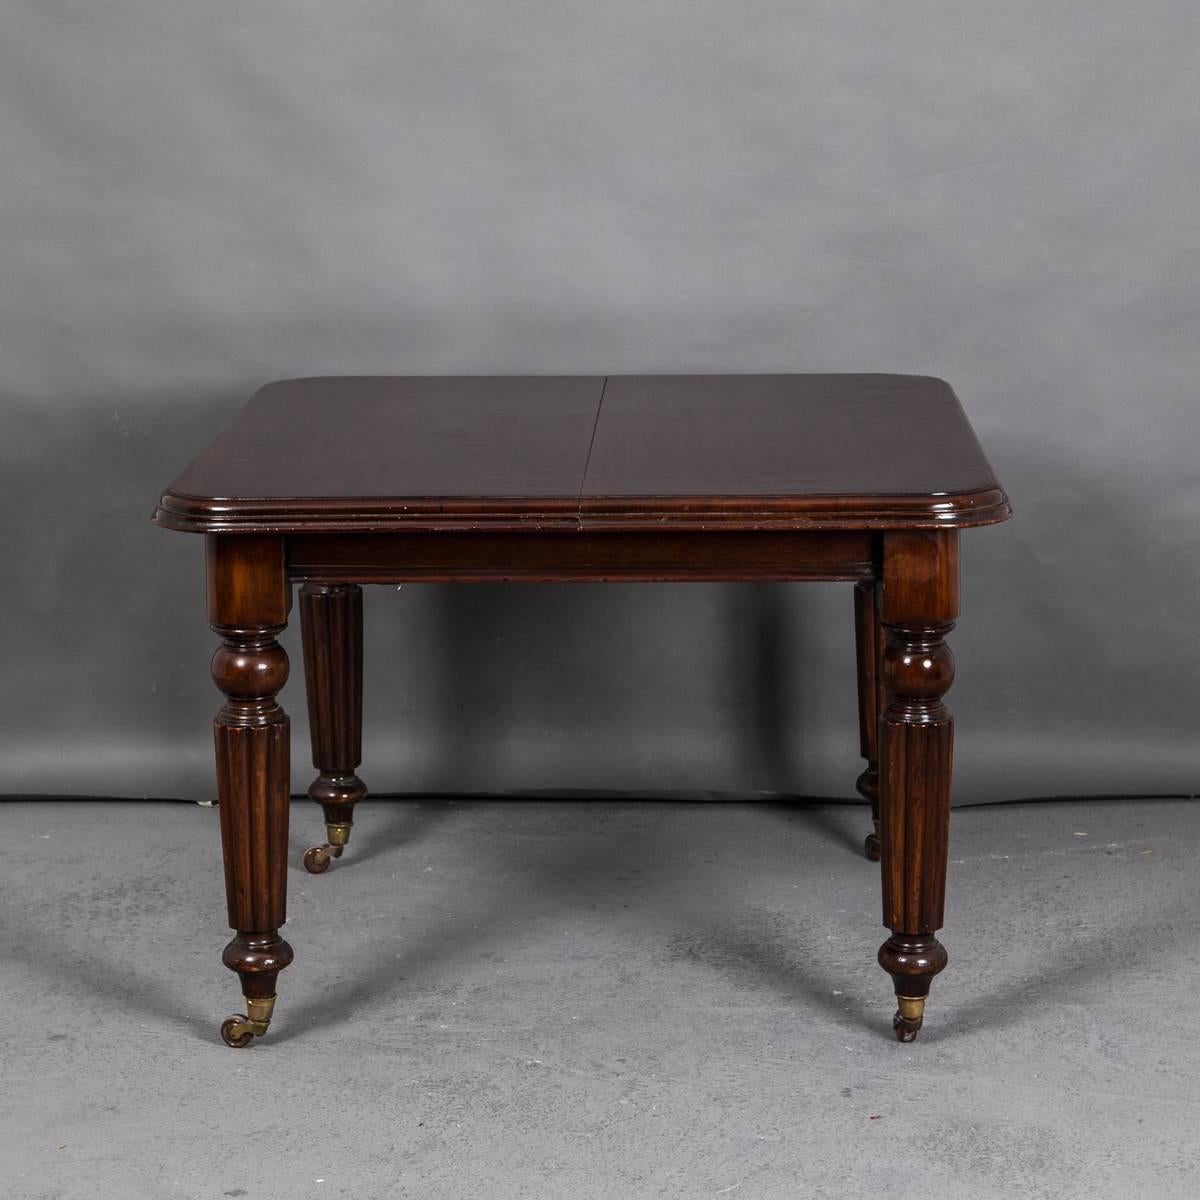 An elegant dining table made in England from polished dark brown mahogany. Extendable with one leaf (as in picture) of 18.2 in. Rounded and channeled legs ending with brass casters. Reeded edge of top. 